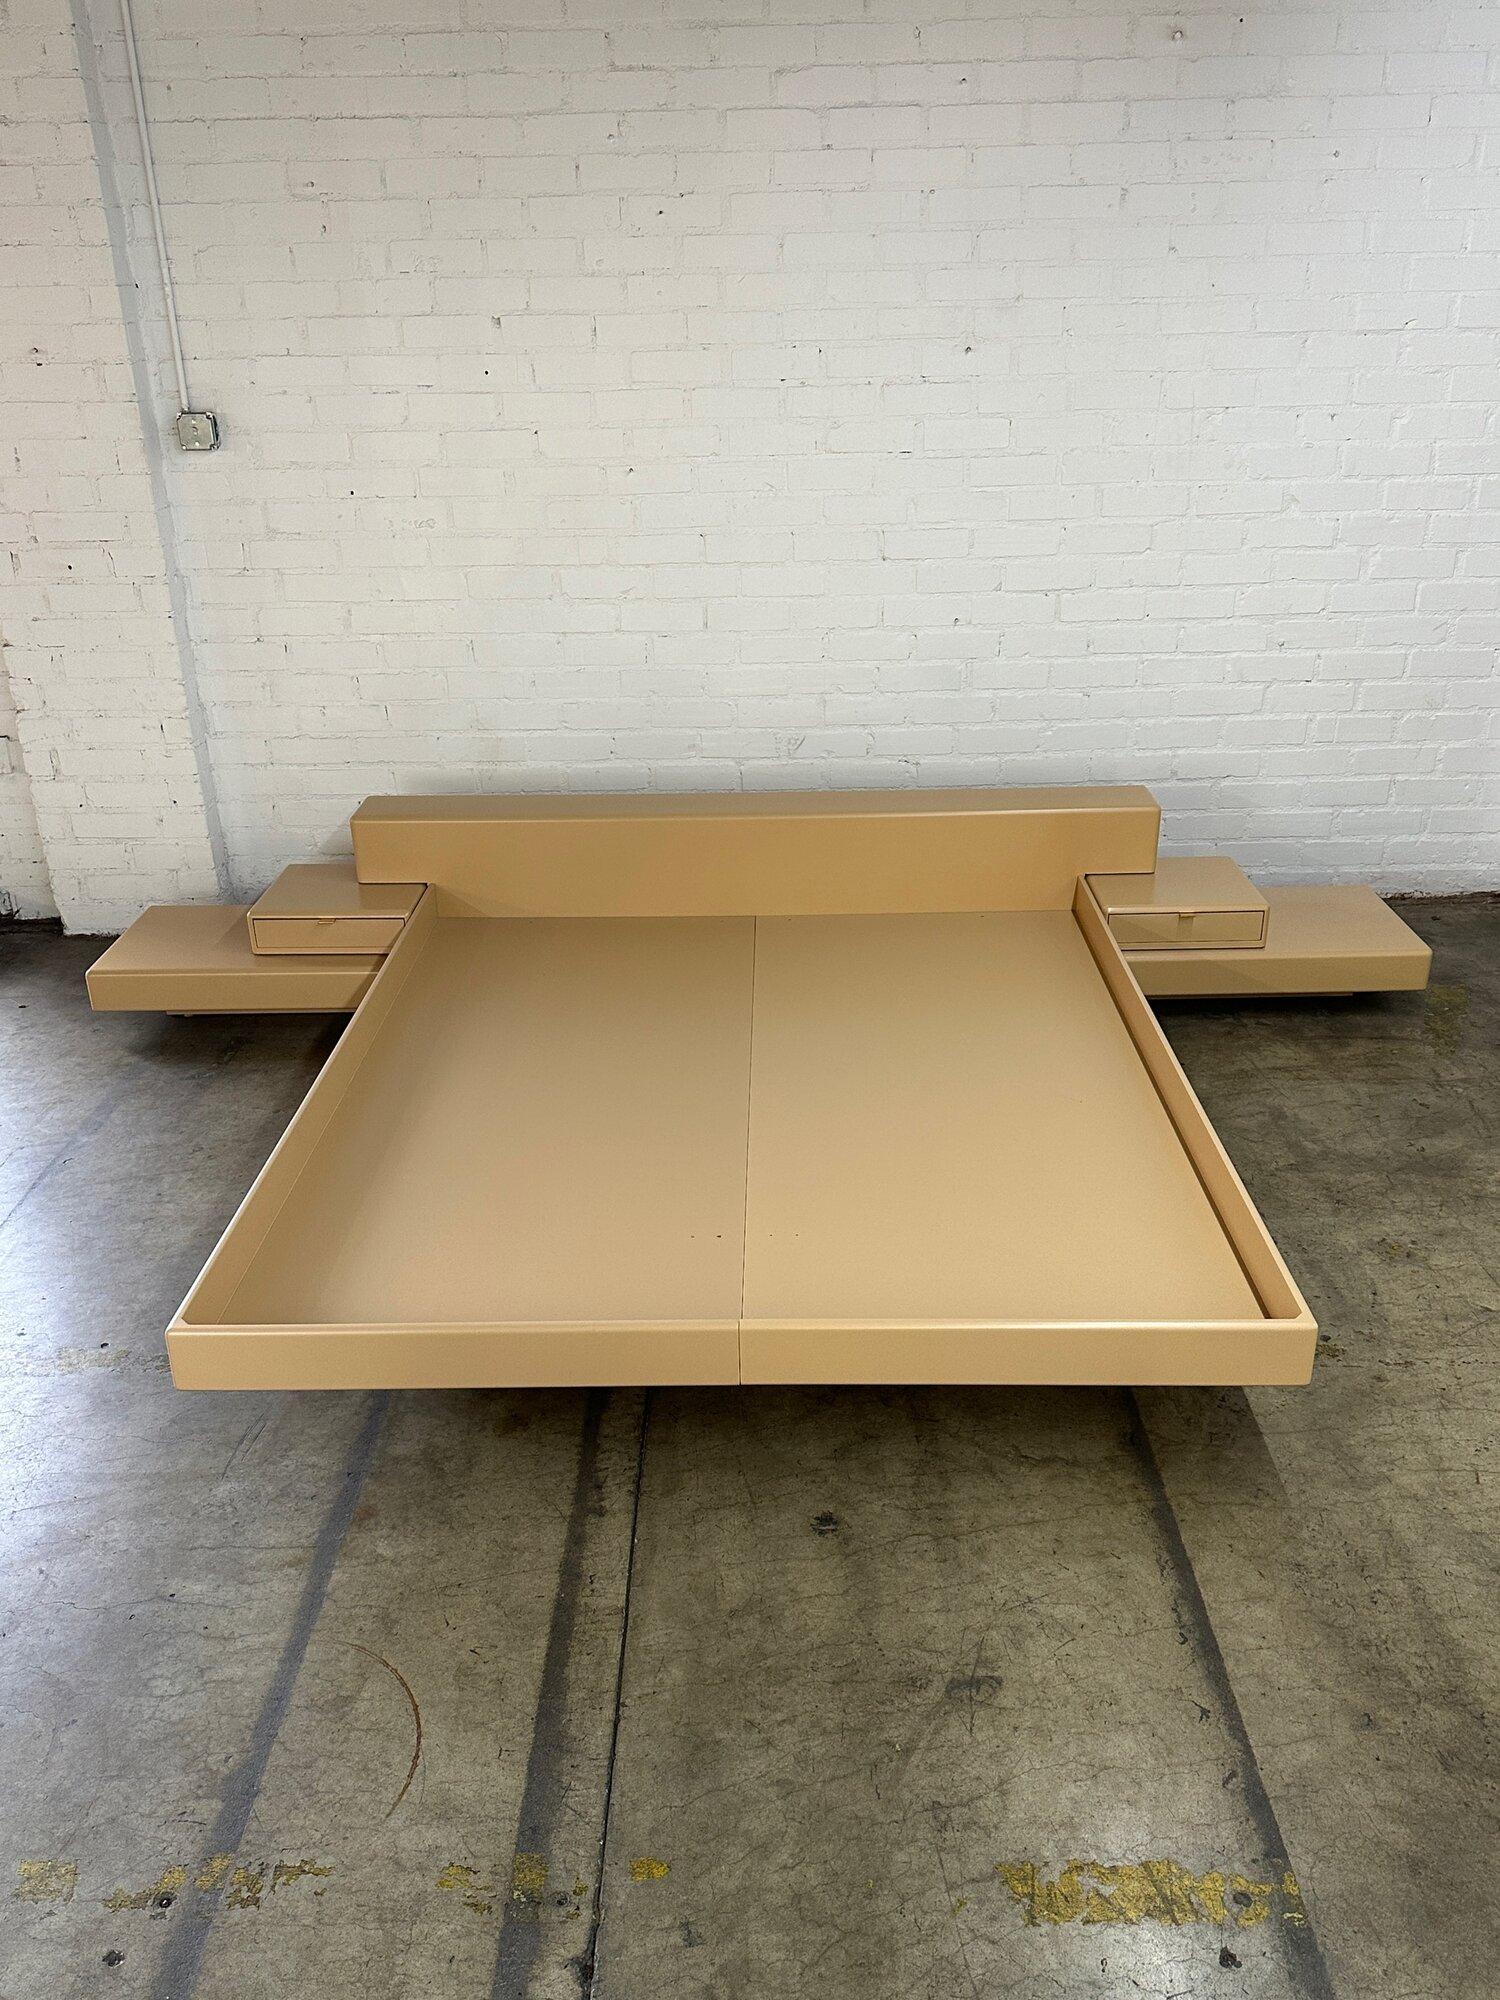 W146 D93 H21.5

SIDE TABLE W34 D20 H9

Inner BedW74 D85 H5

Platform H14

1980’s California King Platform Bed, Lacquered in the color Acorn Yellow by Benjamin Moore. Bed consists of a low profile platform base with nightstands that have a brass pull